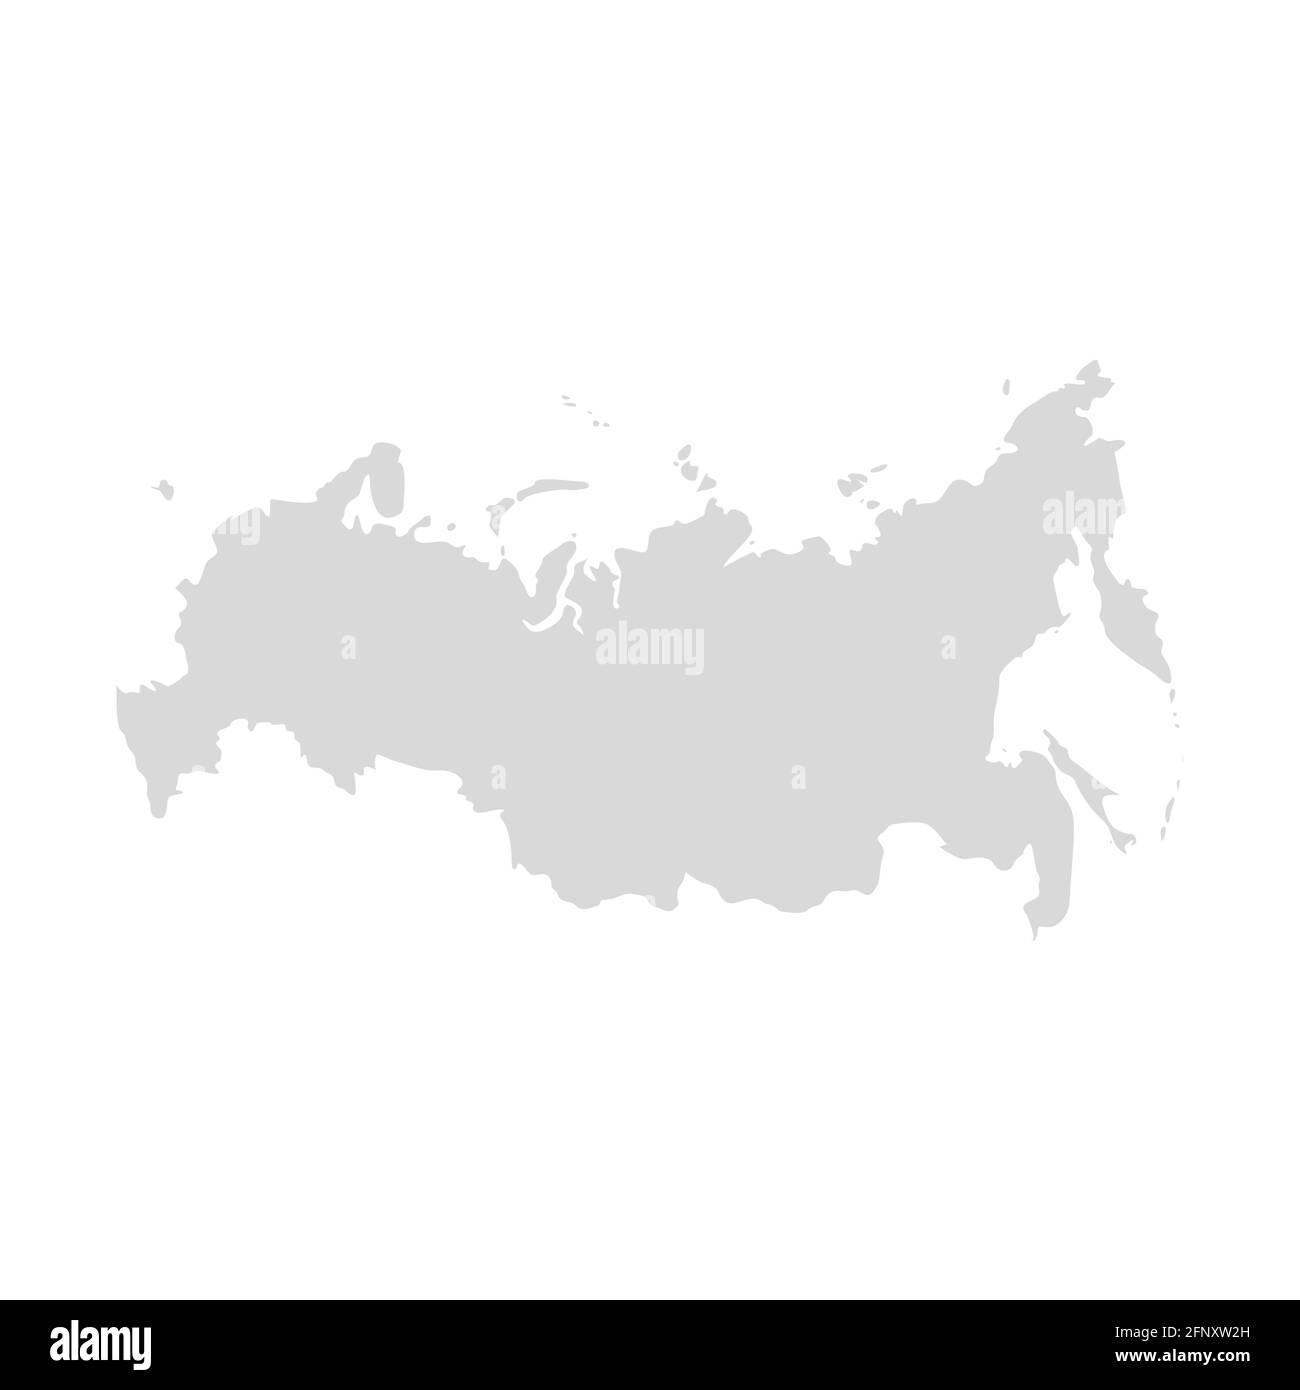 Russia vector map, country flat silhouette border. Russia digital map eurasia. Stock Vector